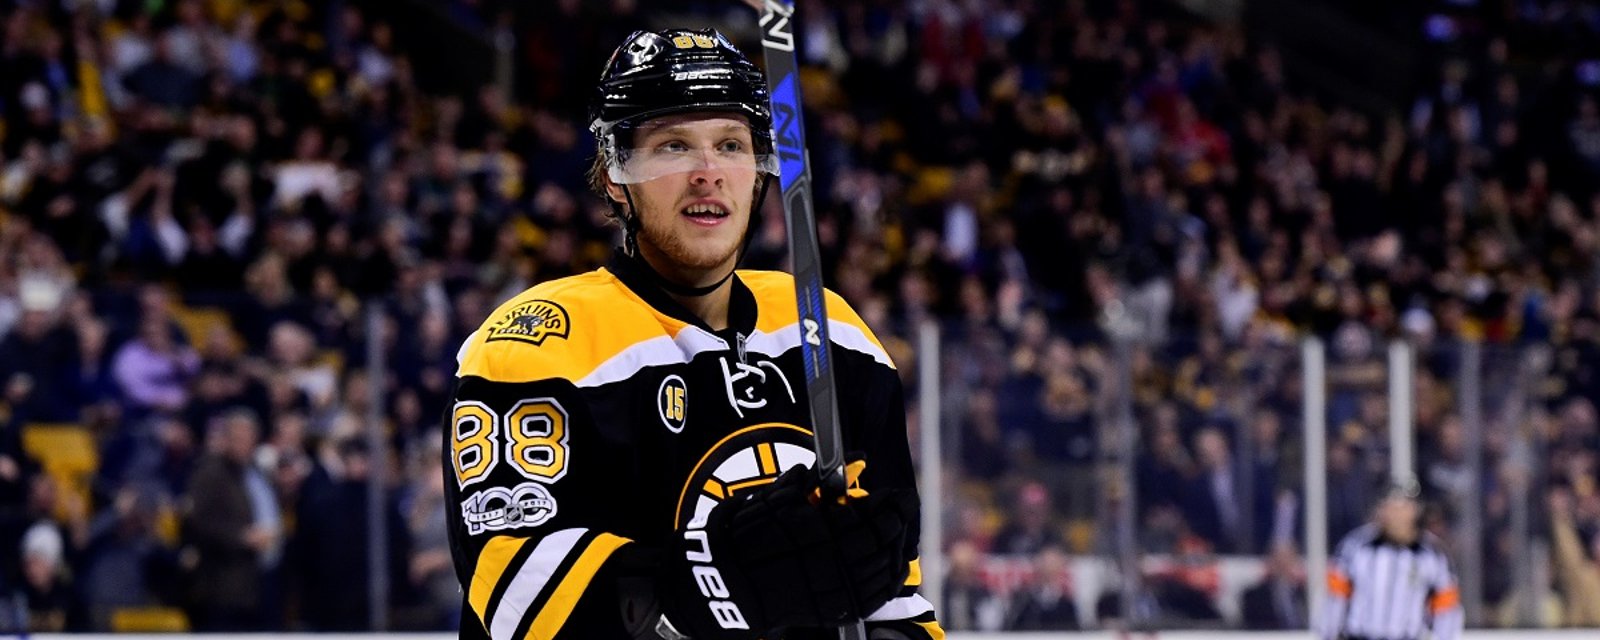 David Pastrnak out once again for Game 4.